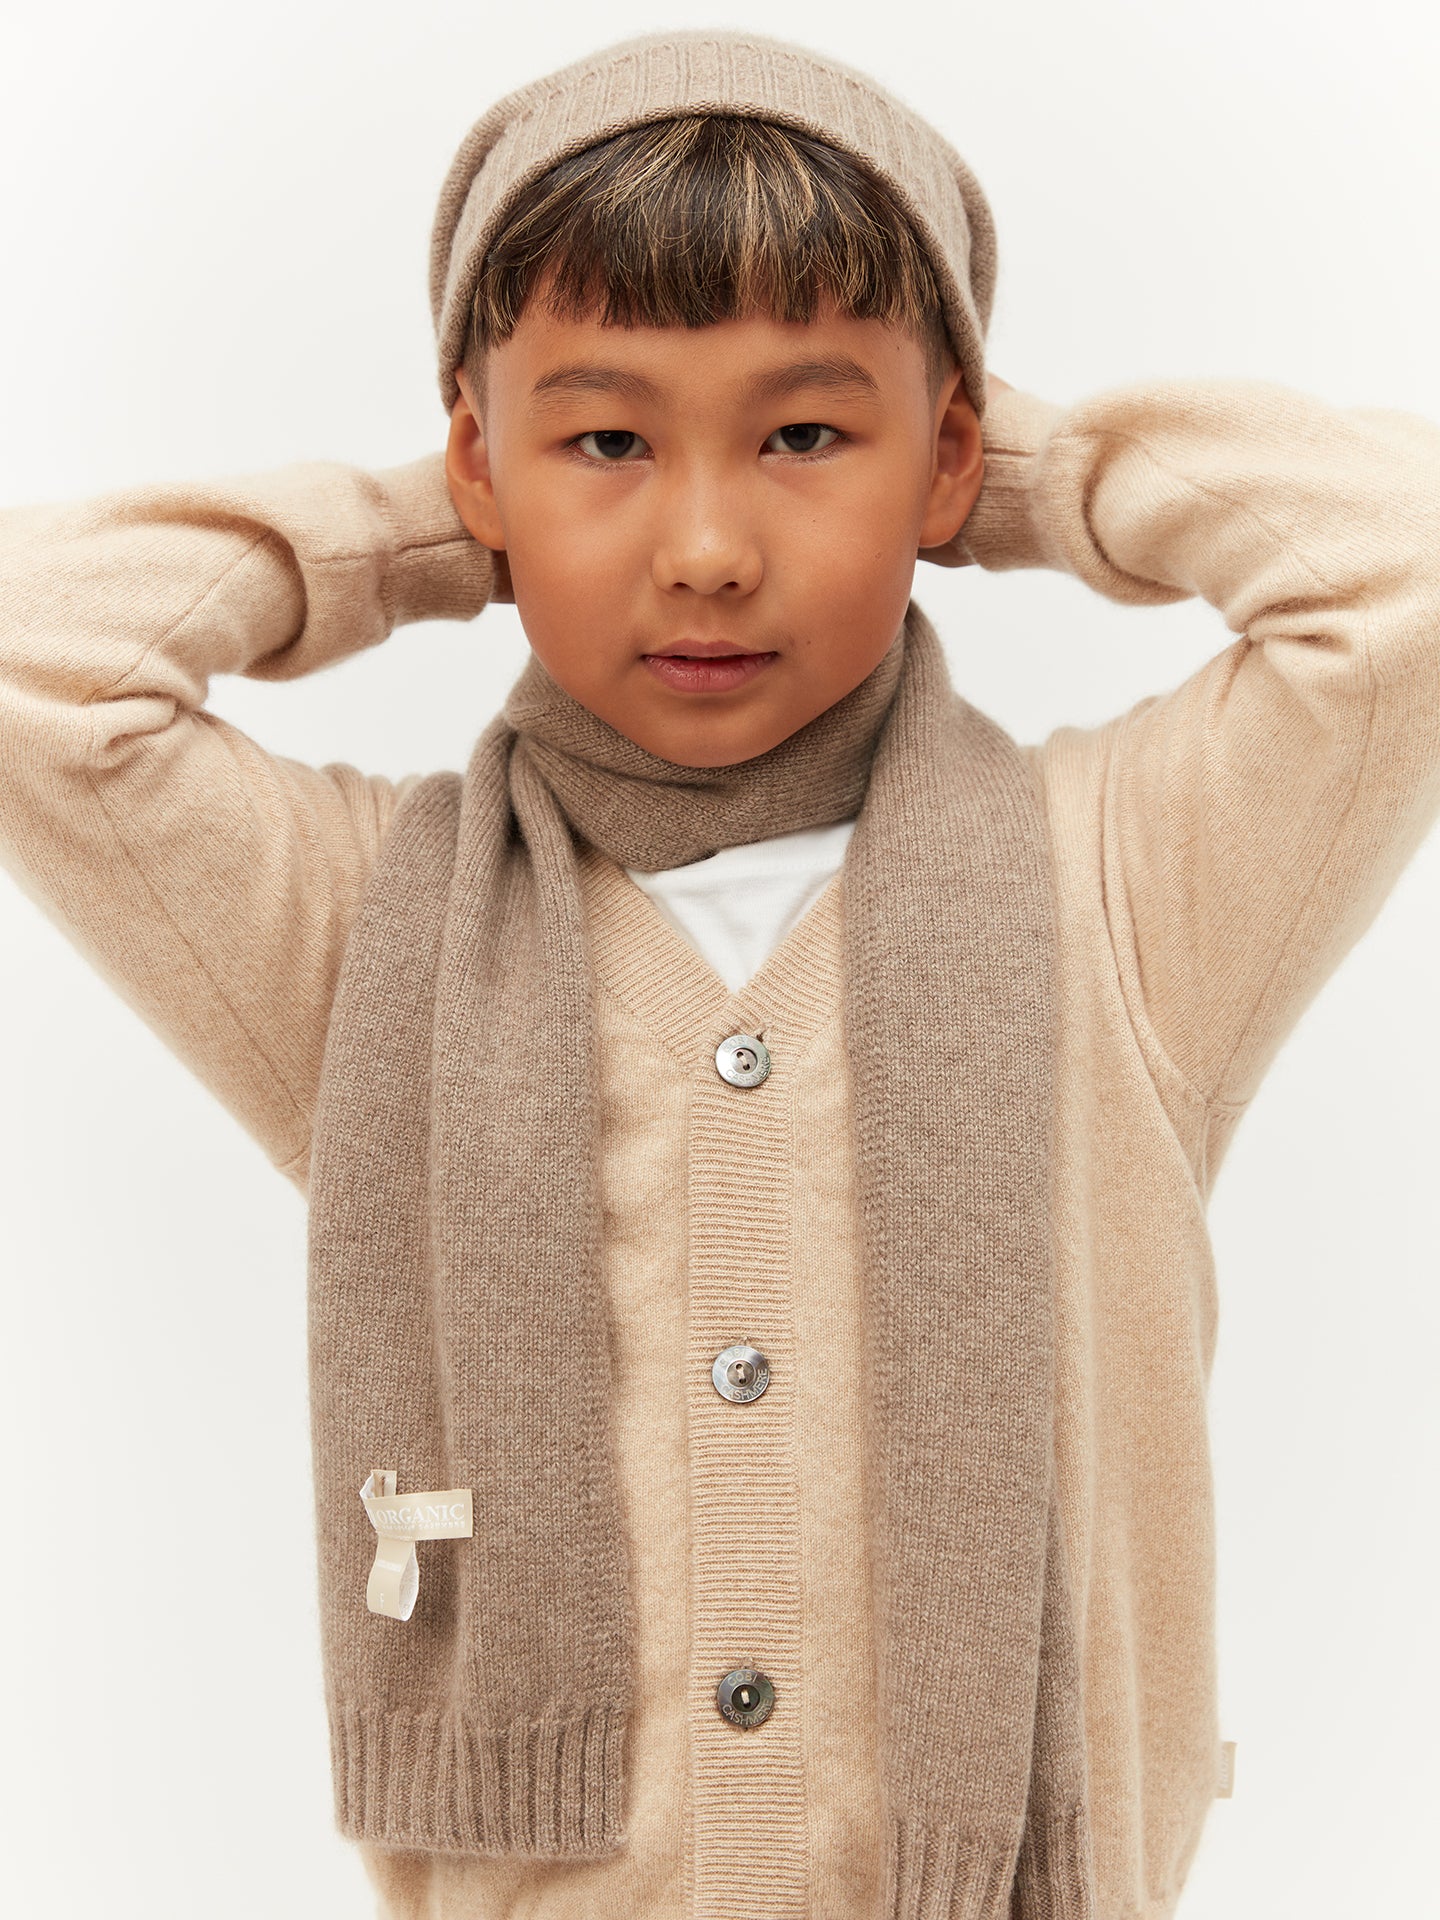 Unisex Cashmere Kids Knitted Scarf Taupe - Gobi Cashmere